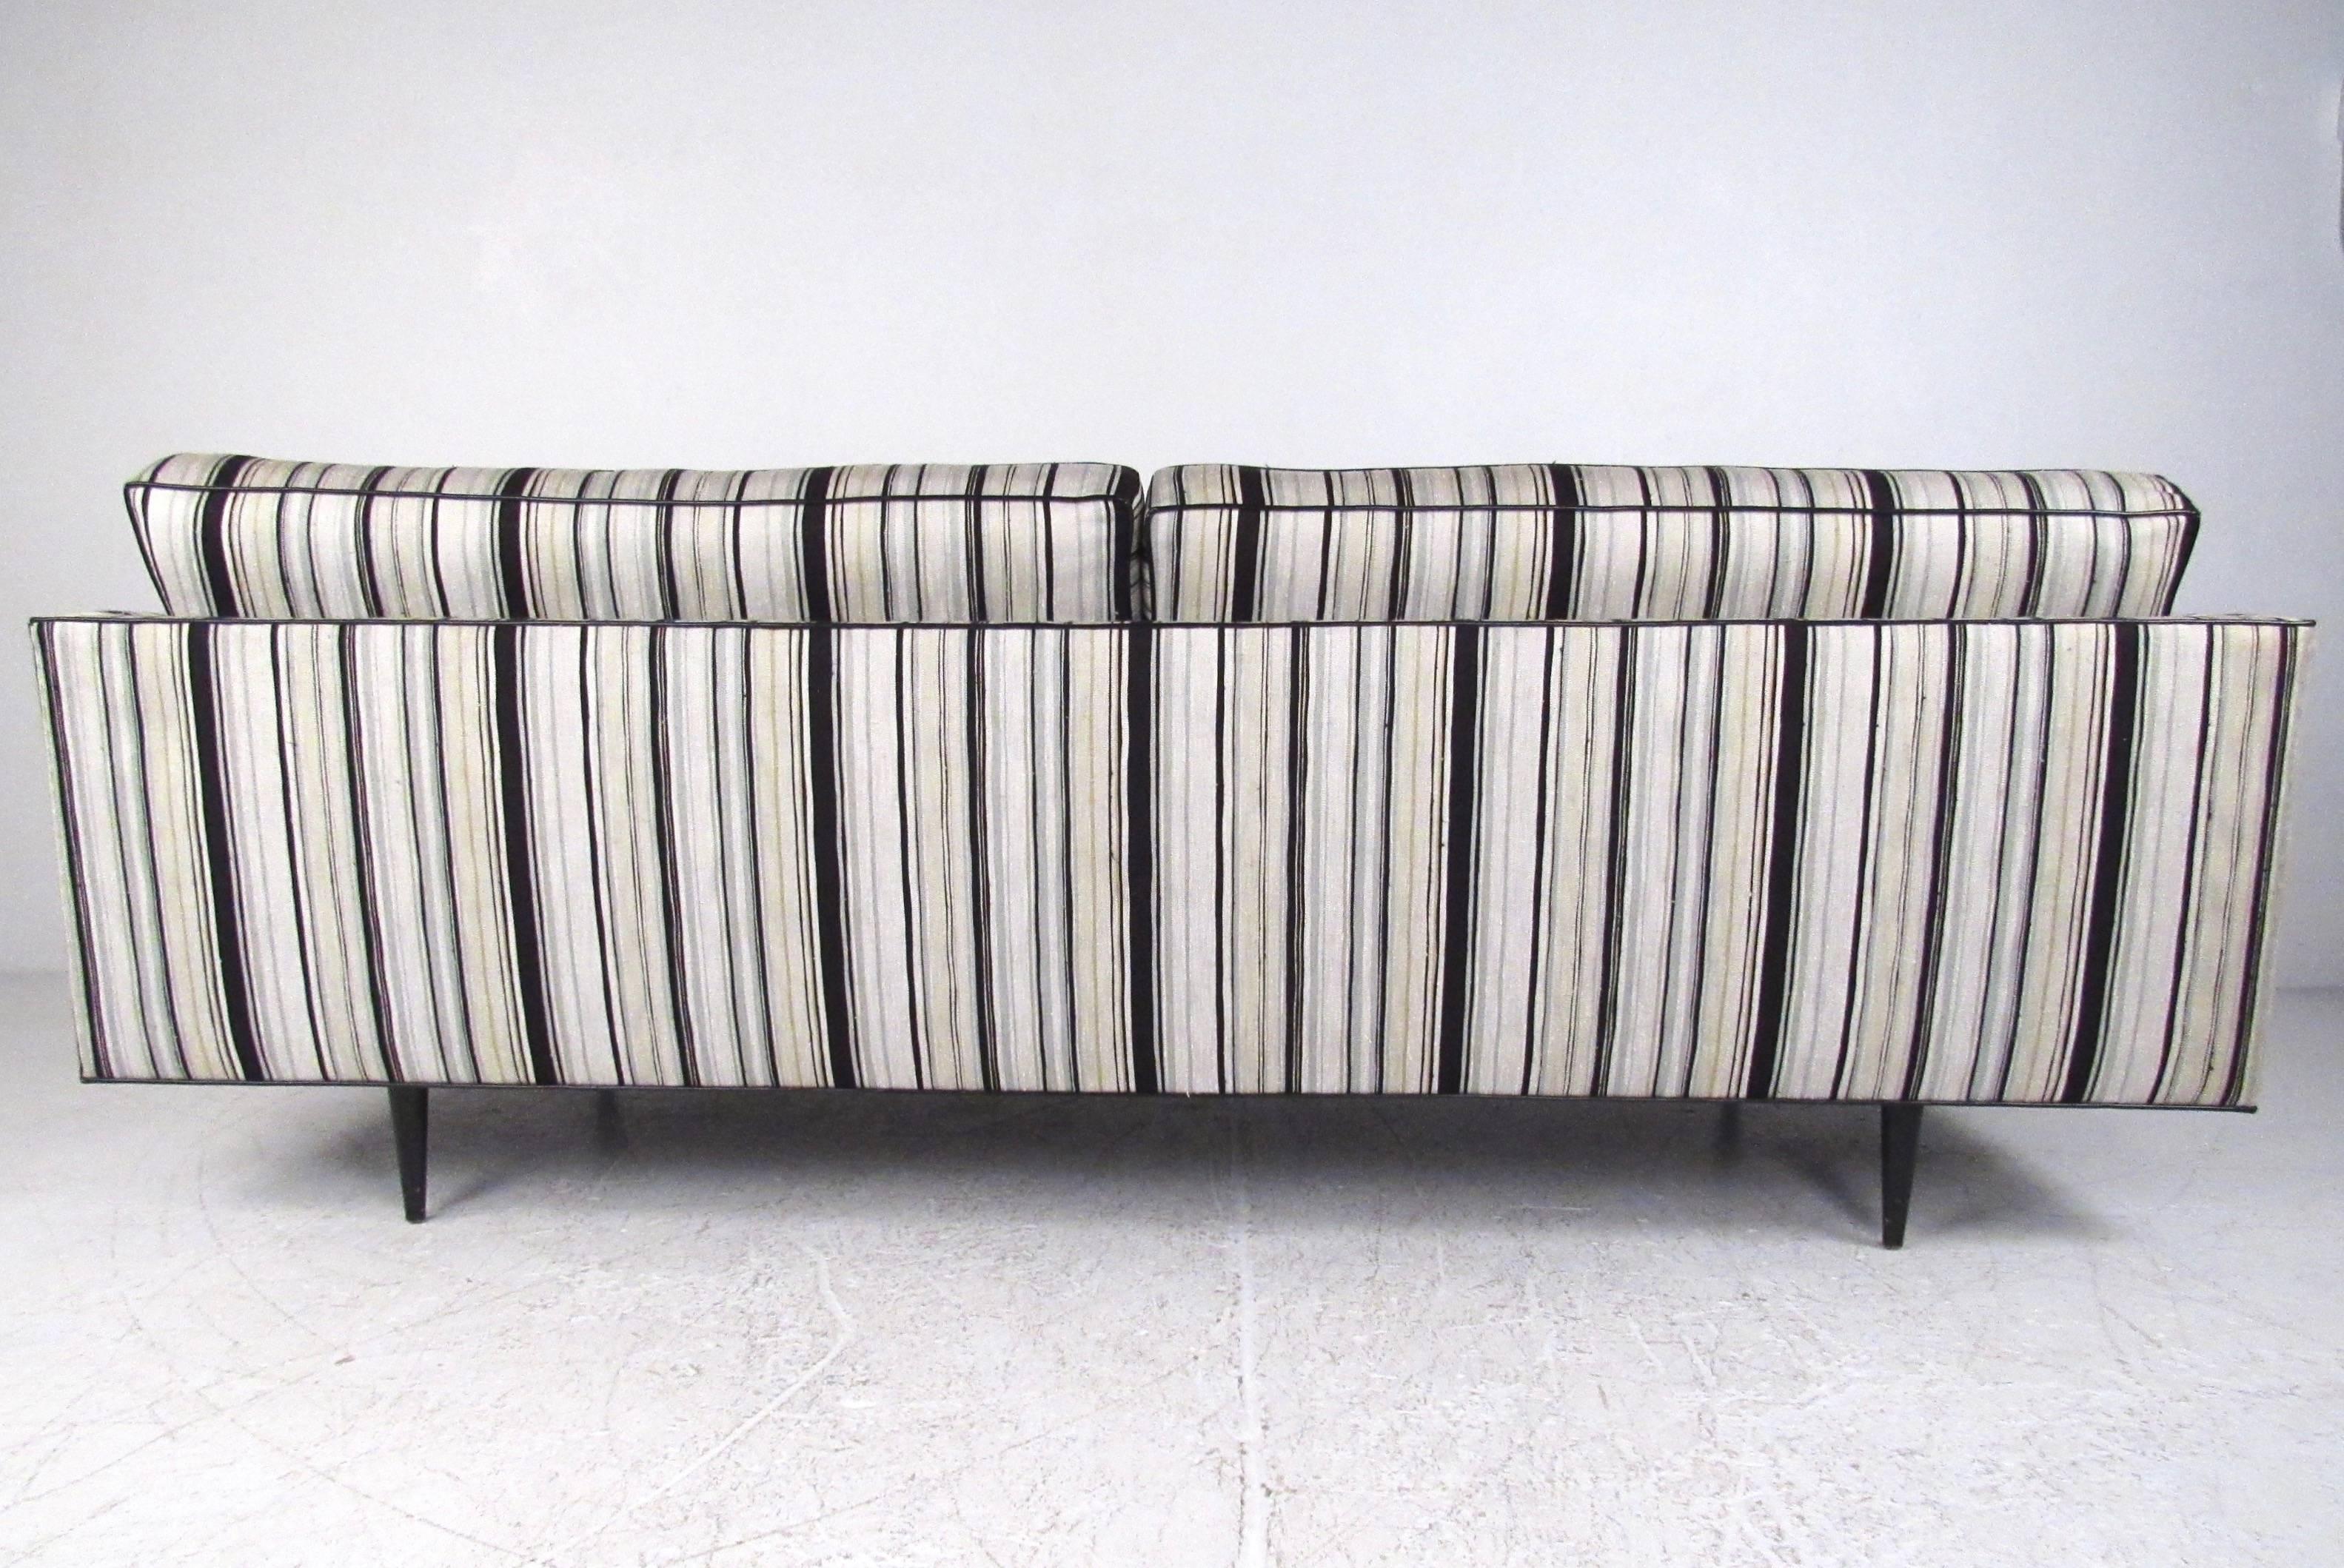 Vintage Mid-Century Modern Sofa by Dunbar In Good Condition For Sale In Brooklyn, NY